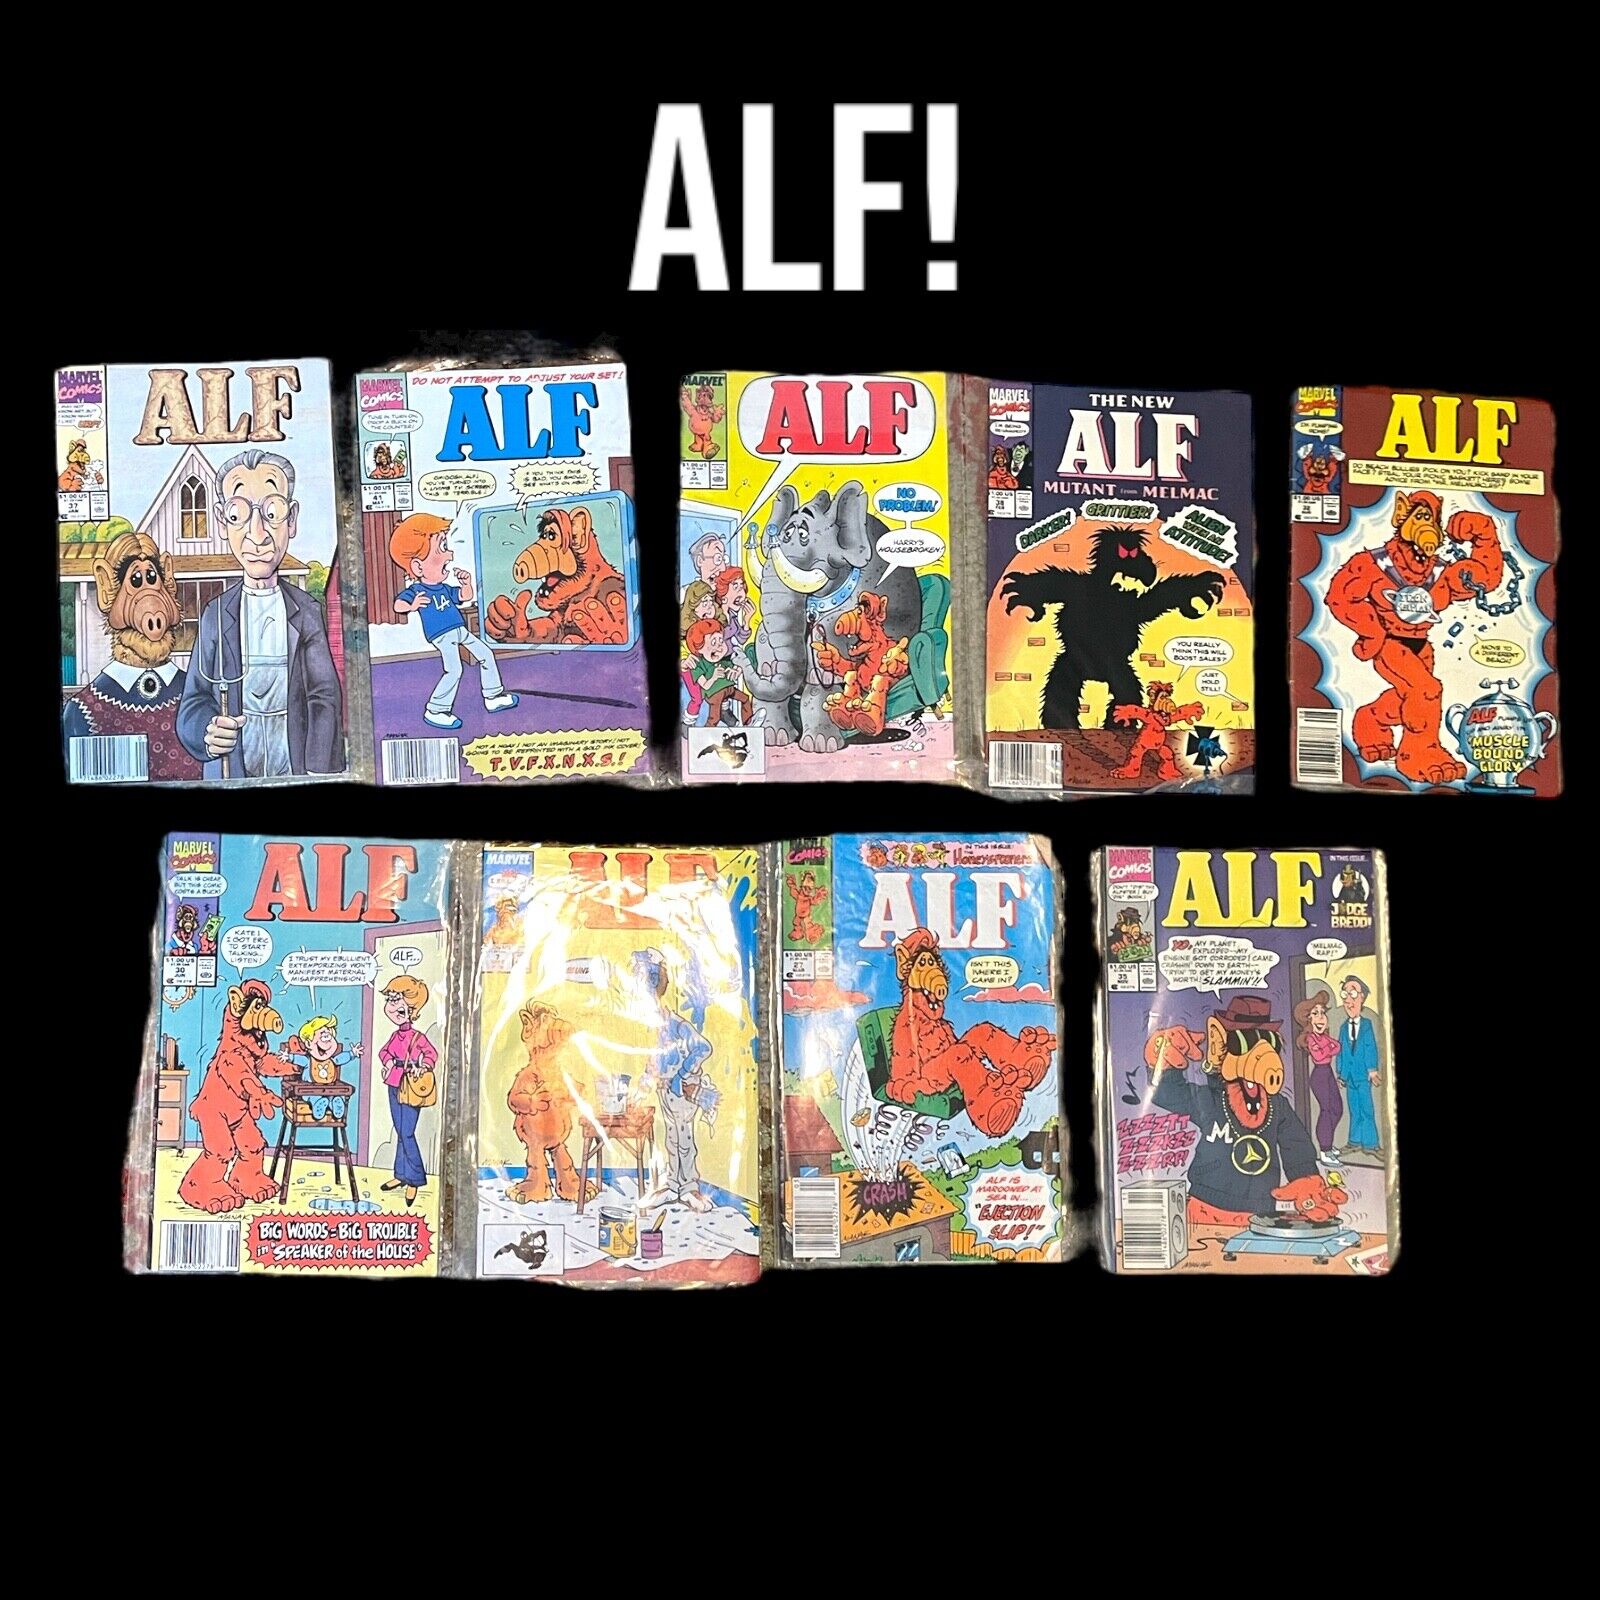 ALF Comic Books vintage Lot of 9 good condition with clear covers Marvel Comics